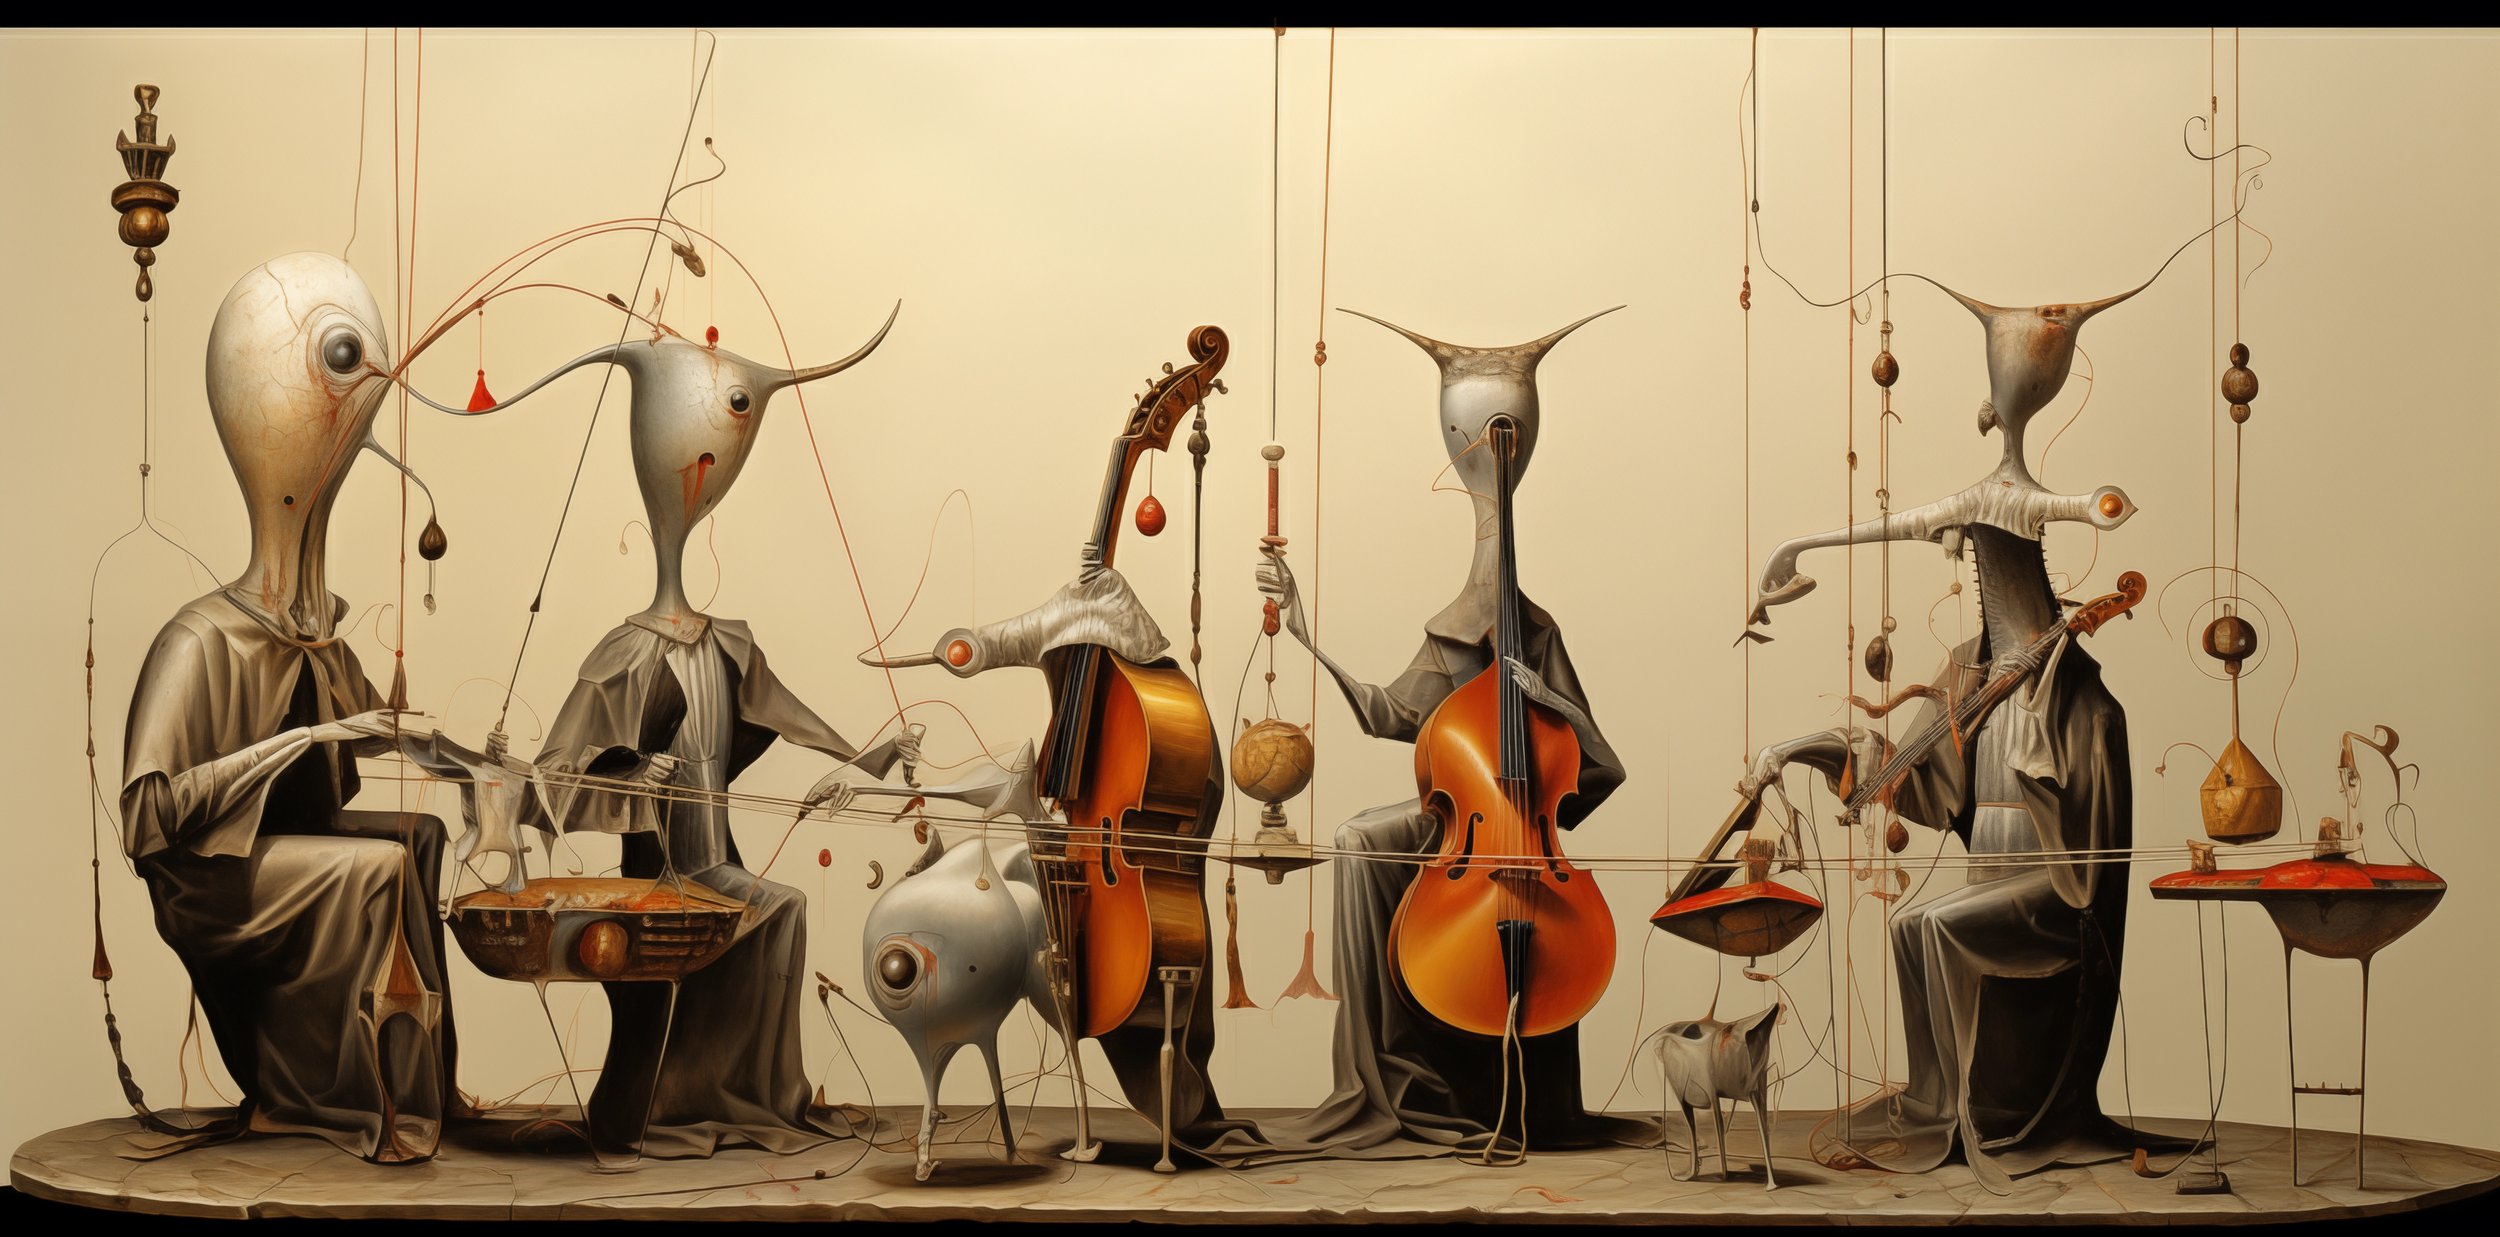 The Surreal Symphony